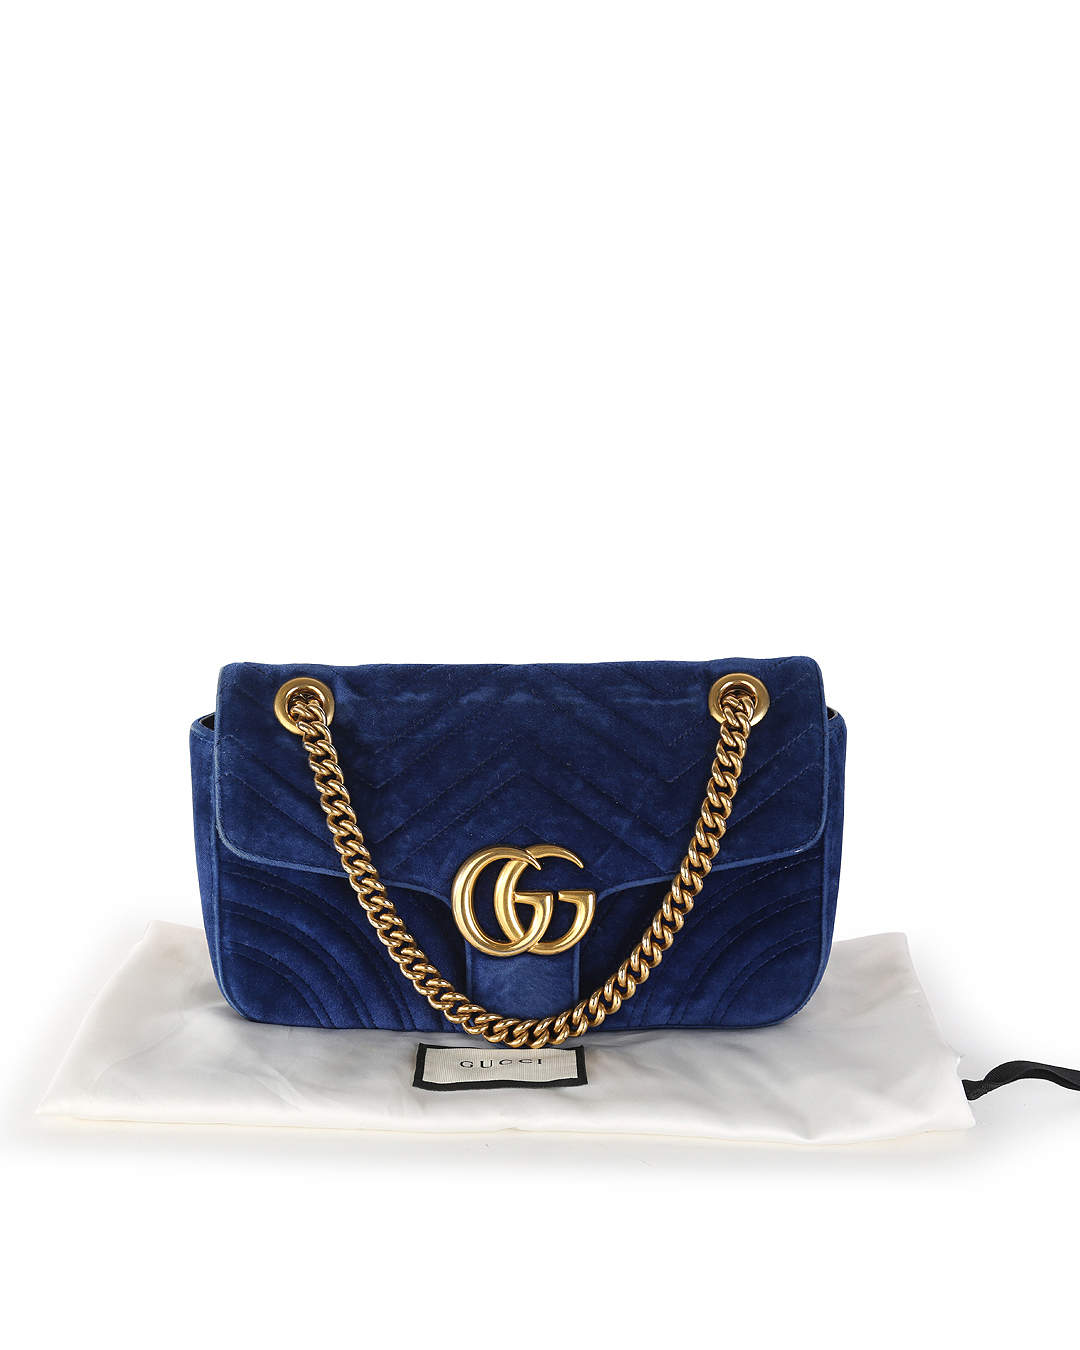 Luxury bags - Marmont clutch bag in blue velvet Gucci